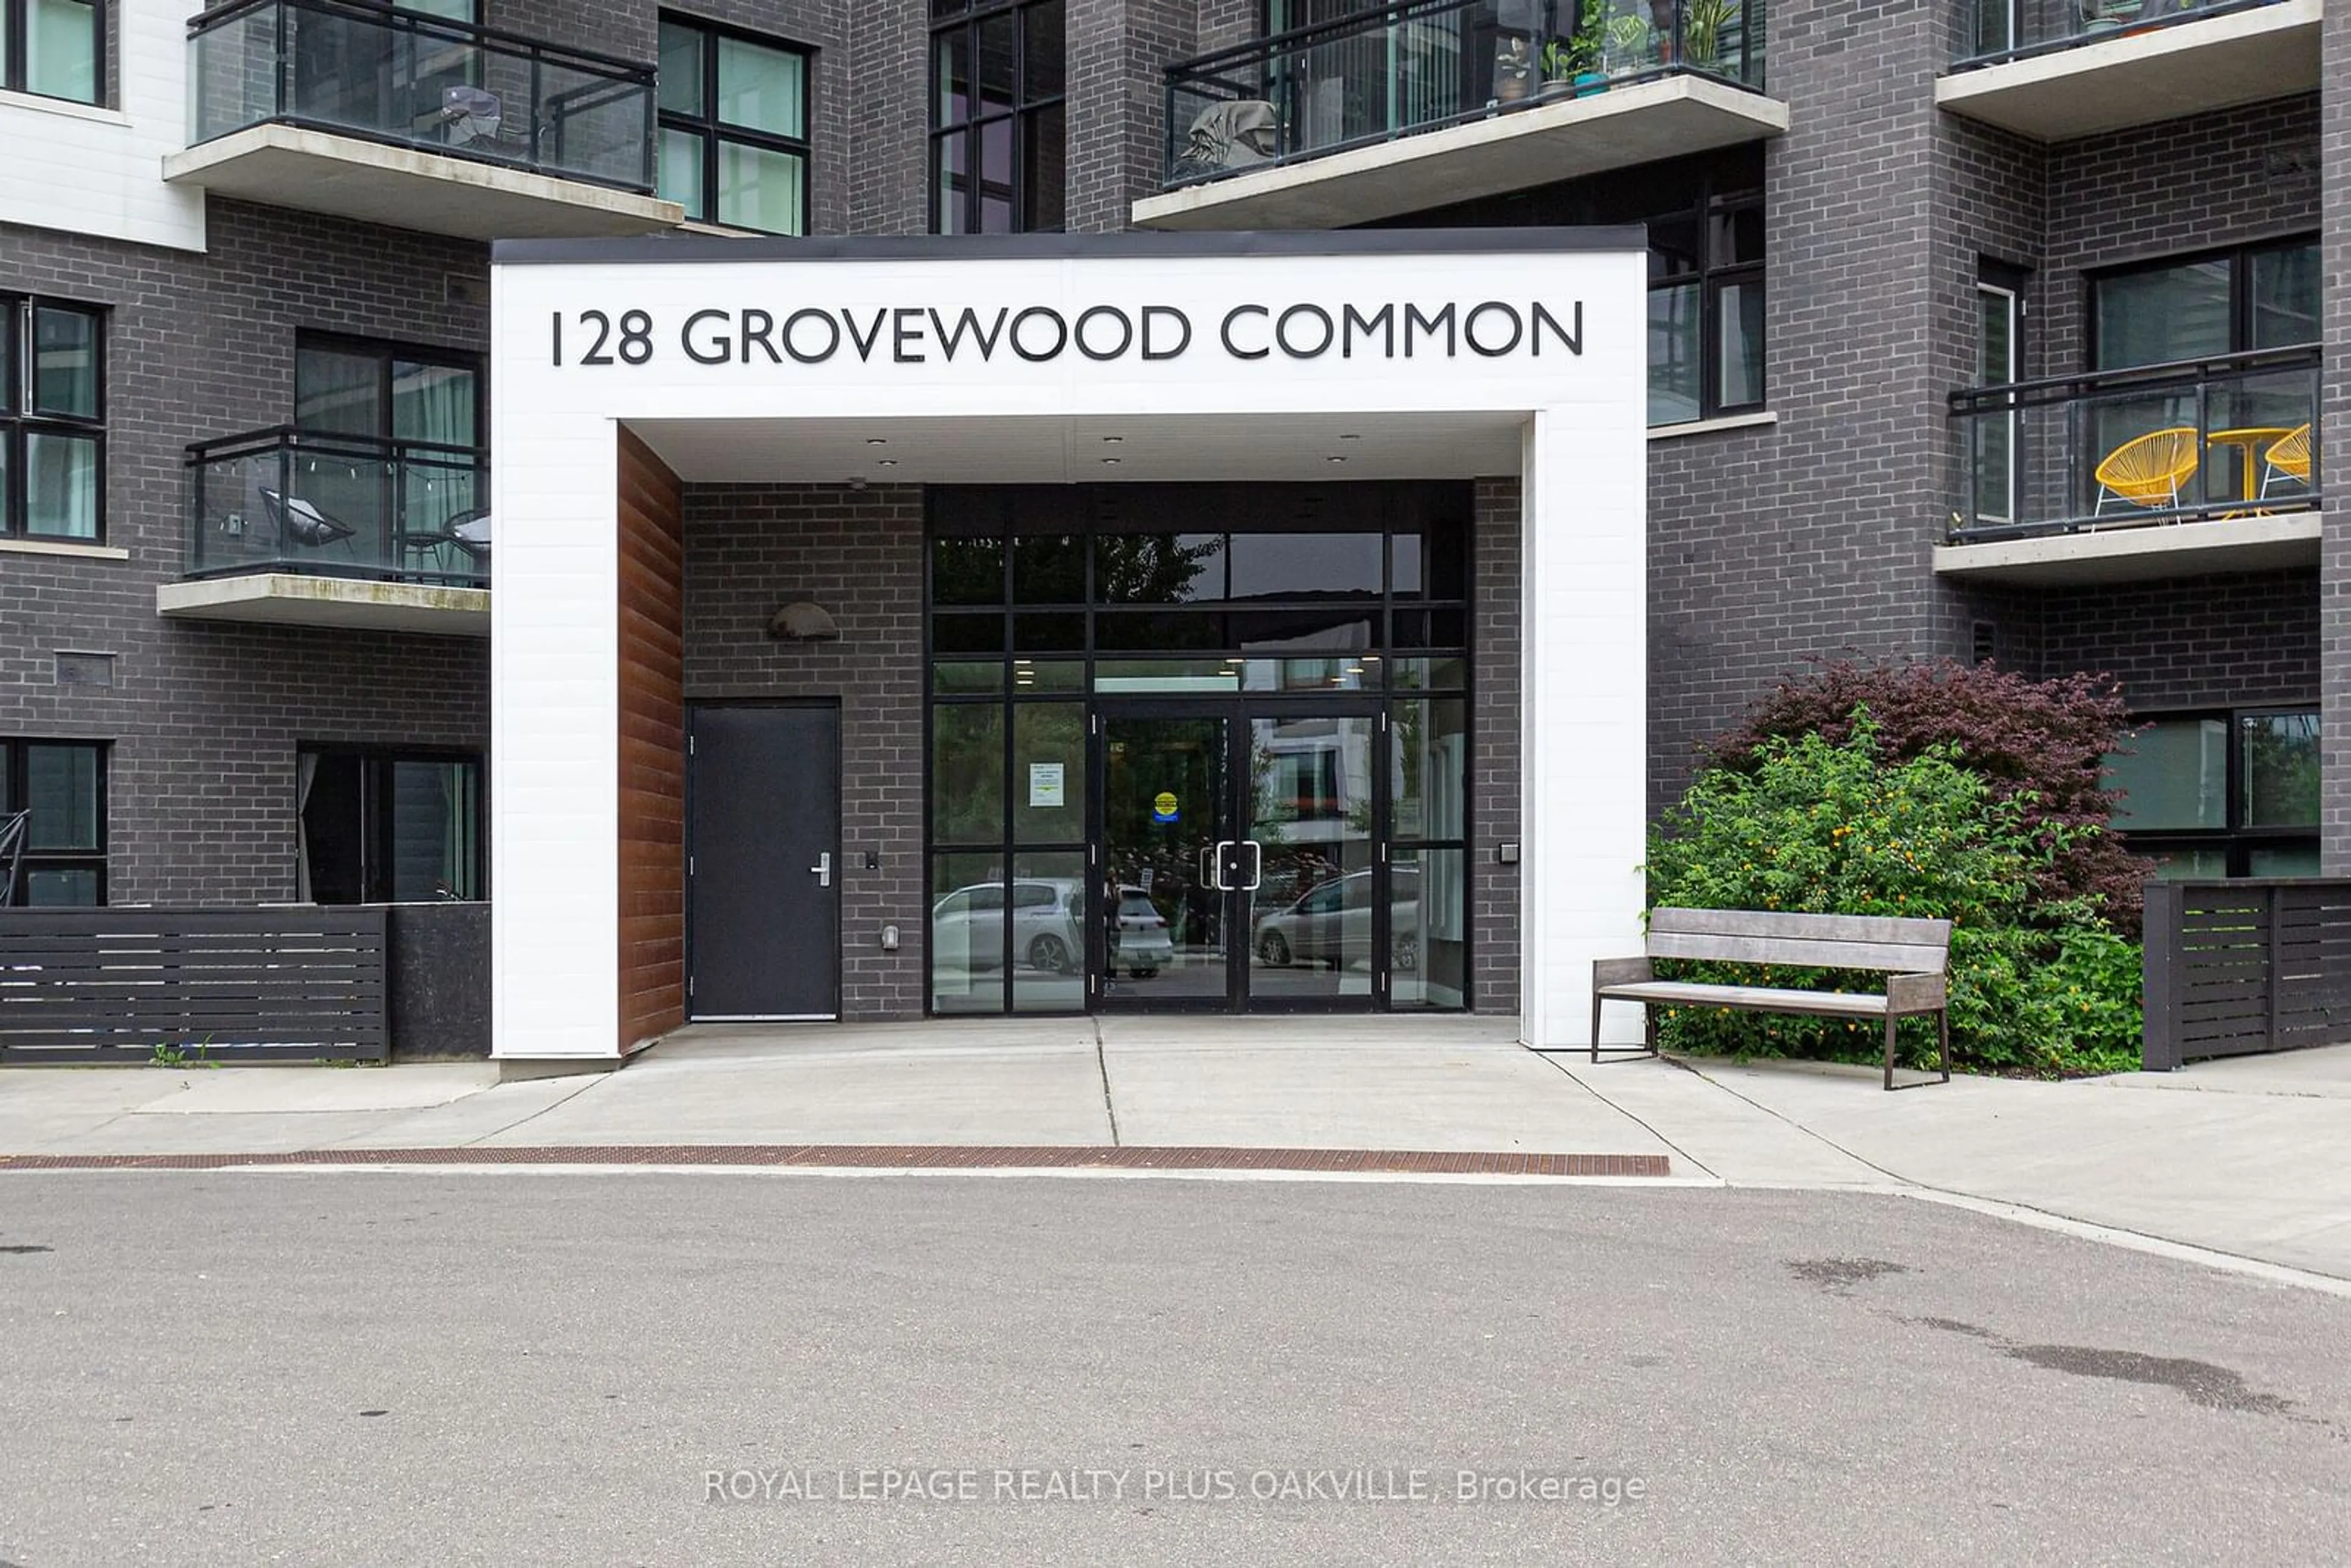 Indoor foyer for 128 Grovewood Common #428, Oakville Ontario L6H 0X3